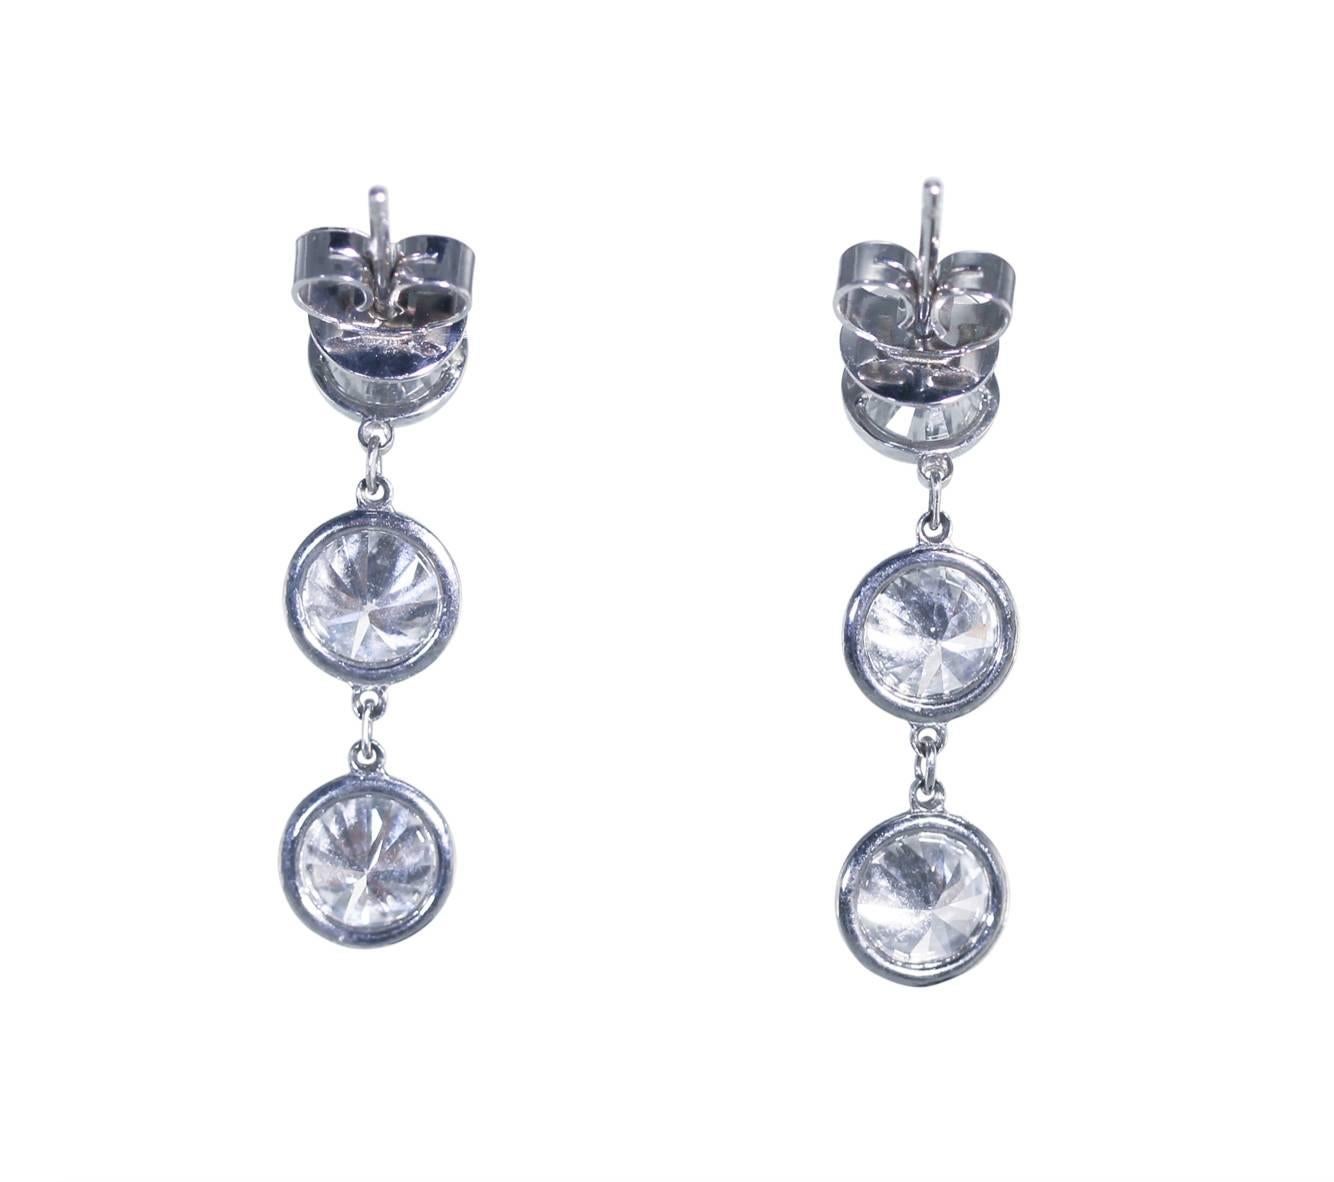 Pair of Handmade Platinum and Diamond Earrings
• 6 round diamonds collet-set, approximately 4.00 carats
• G-H color, VS2-SI1 clarity, well cut
• Platinum
• Length 1 inch, 3.5 grams gross weight